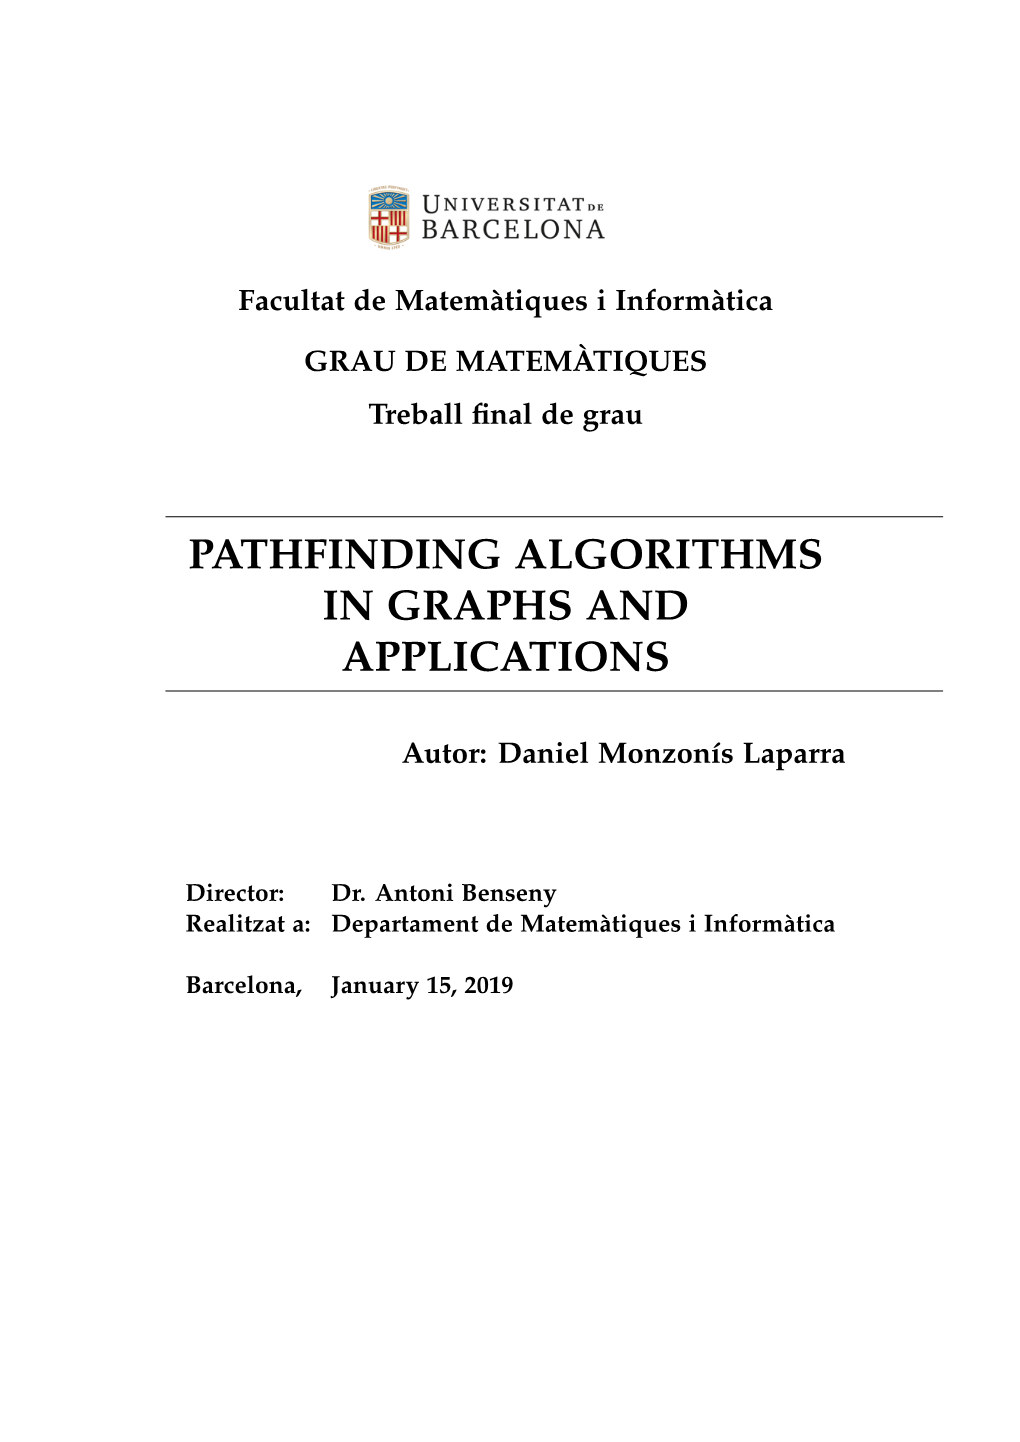 Pathfinding Algorithms in Graphs and Applications